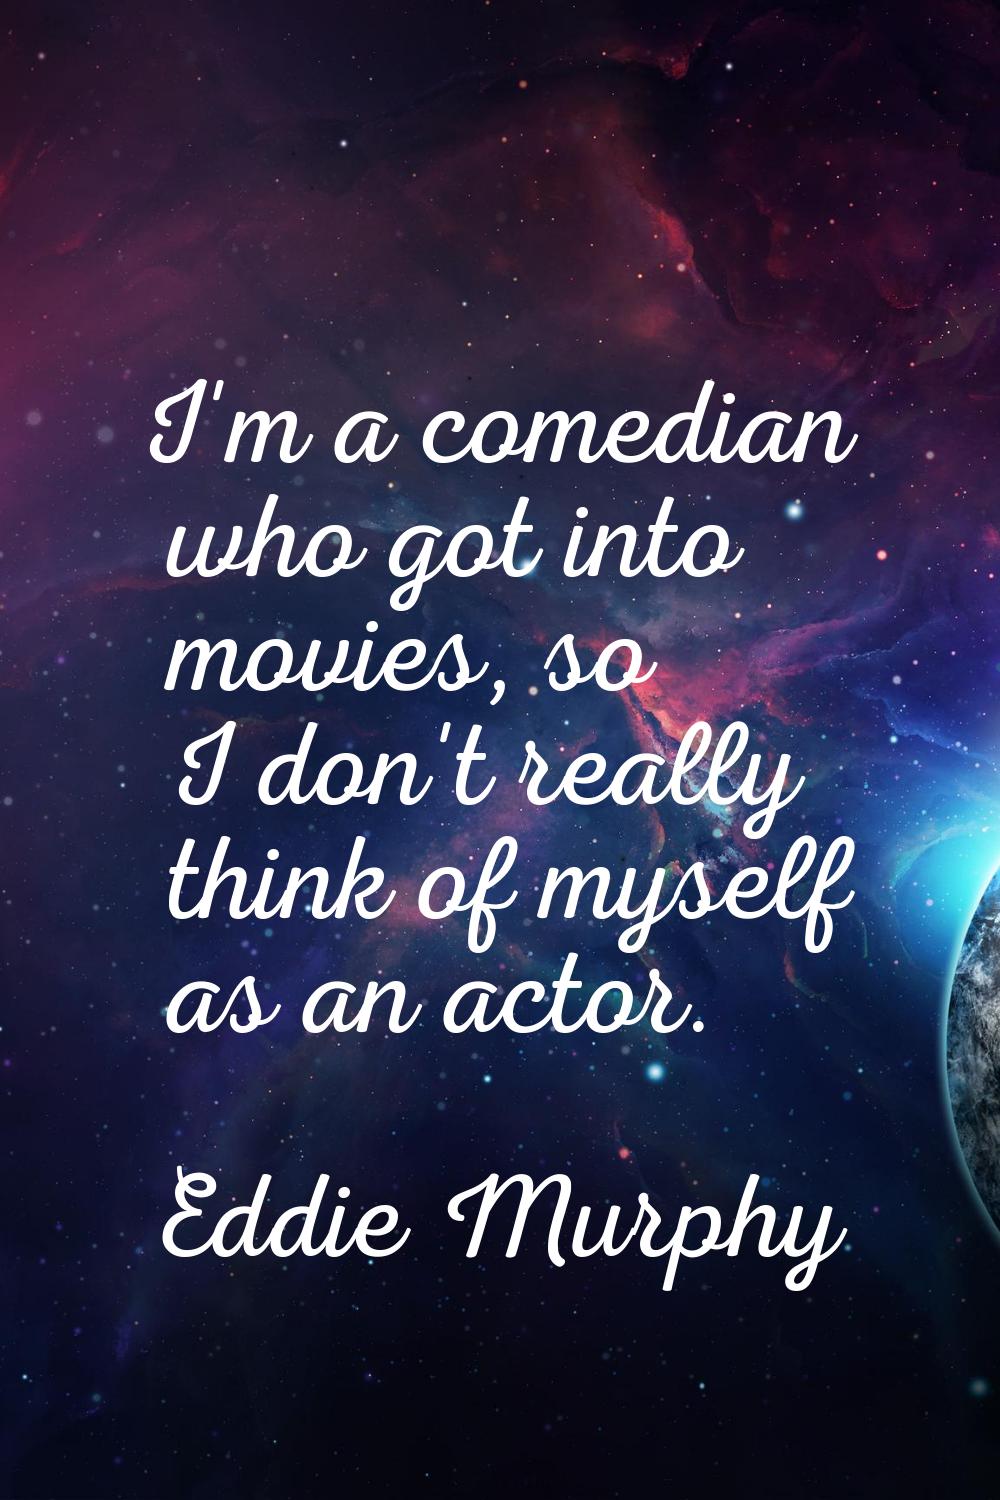 I'm a comedian who got into movies, so I don't really think of myself as an actor.